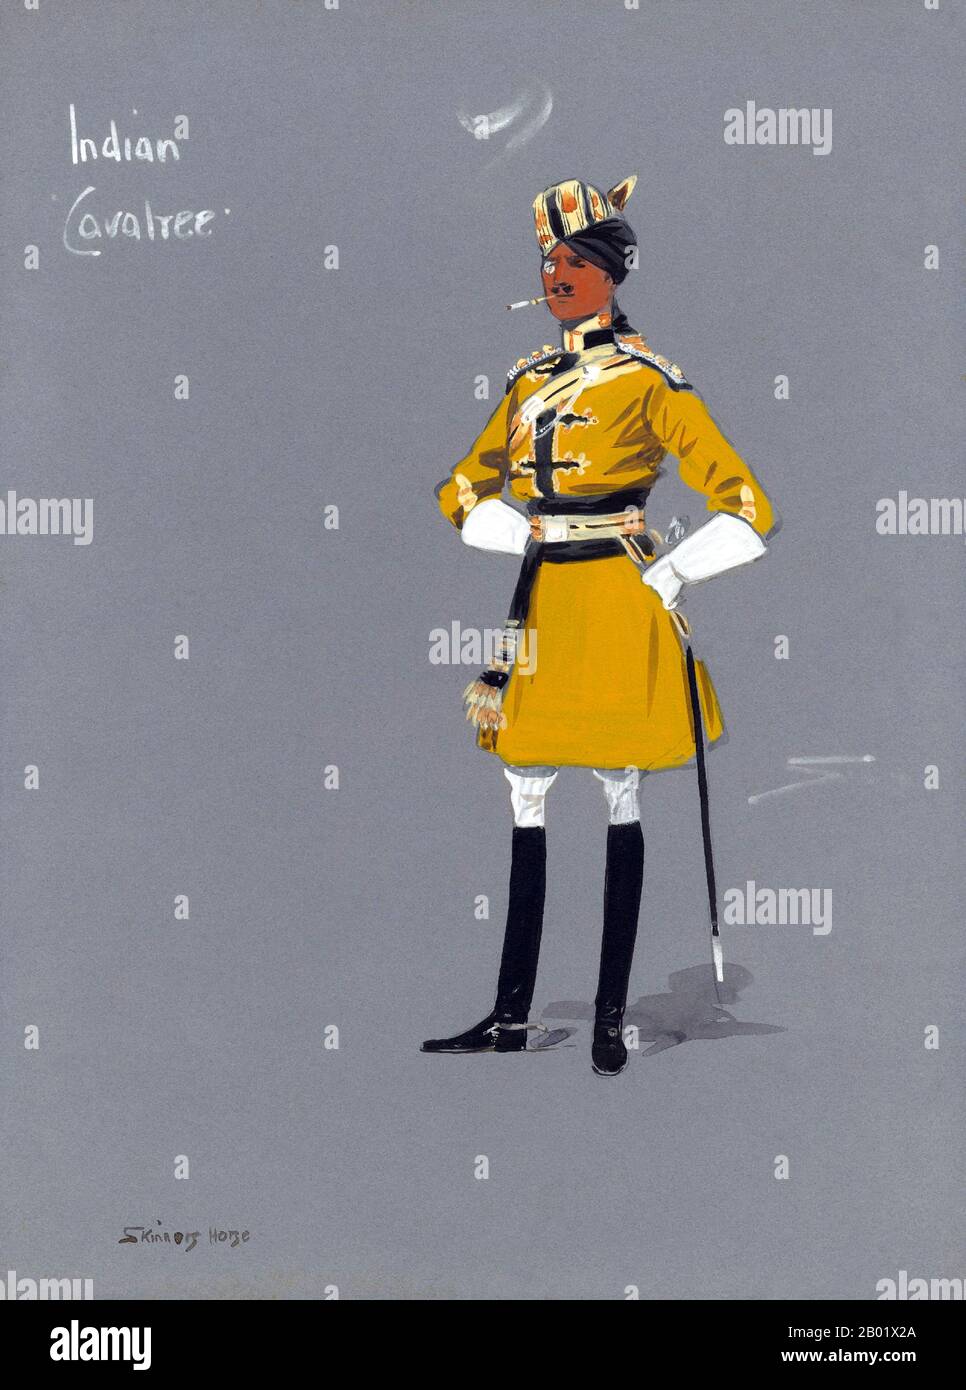 India: Indian 'Cavalree' officer of Skinner's Horse. Caricature style gouache painting by Charles 'Snaffles' Johnson Payne (1884-1967), 1910.  The 1st Duke of York's Own Lancers (Skinner's Horse) was a unit of the British Indian Army from 1922 to independence and thereafter a unit of the Indian Army.  Its foundation was when it was raised in 1803 as Skinner’s Horse by James Skinner (Sikander Sahib) as an irregular cavalry regiment in the service of the East India Company. The regiment became (and remains) one of the seniormost cavalry regiments of the Armoured Corps of the Indian Army. Stock Photo